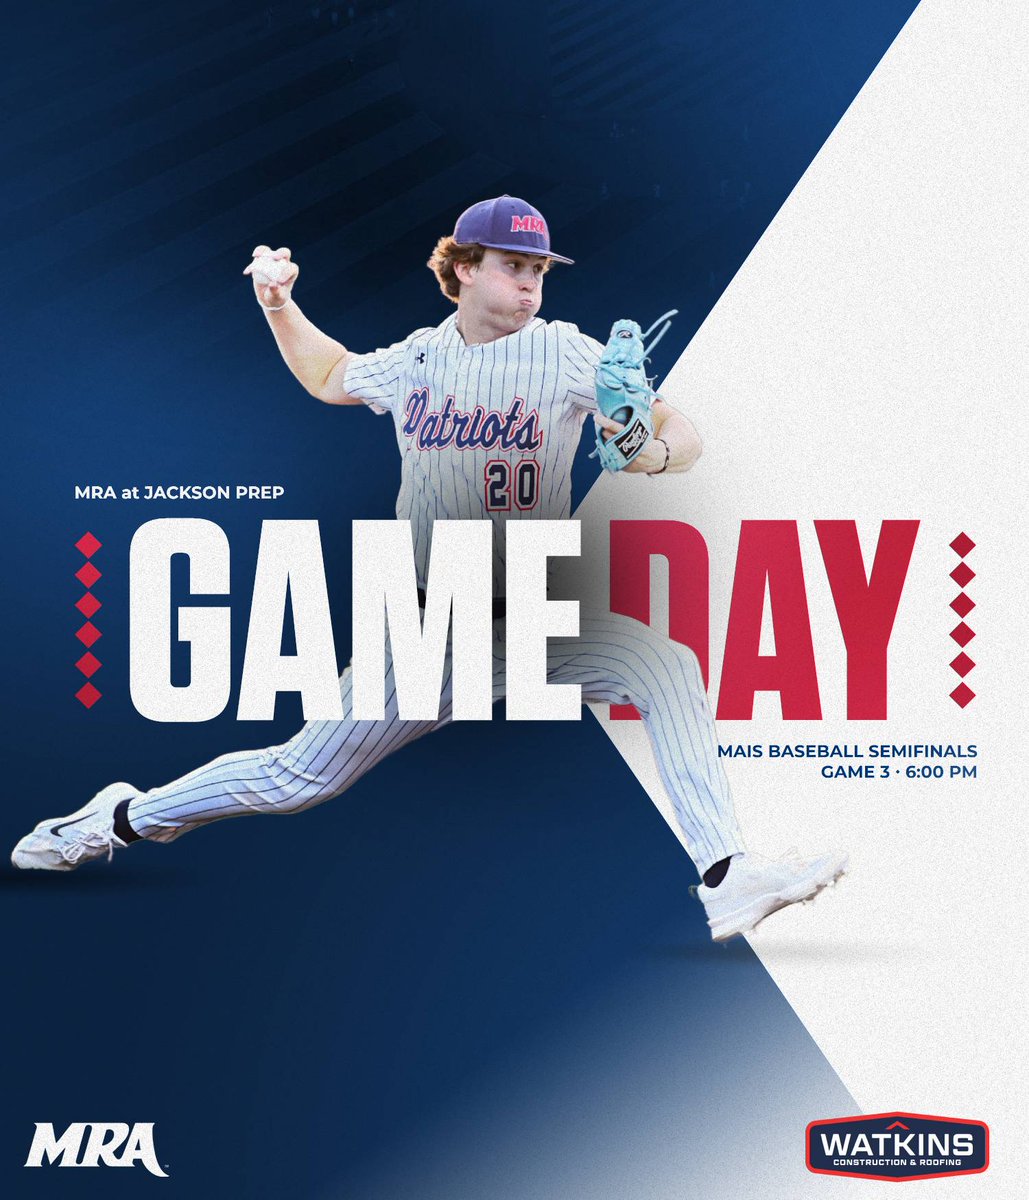 𝗙𝗿𝗶𝗱𝗮𝘆 𝗡𝗶𝗴𝗵𝘁 𝗶𝗻 𝗙𝗹𝗼𝘄𝗼𝗼𝗱 MRA travels to Flowood tonight for the deciding game three in the MAIS 6A semifinals. Winner advances to the State Championship series next week vs. PCS.